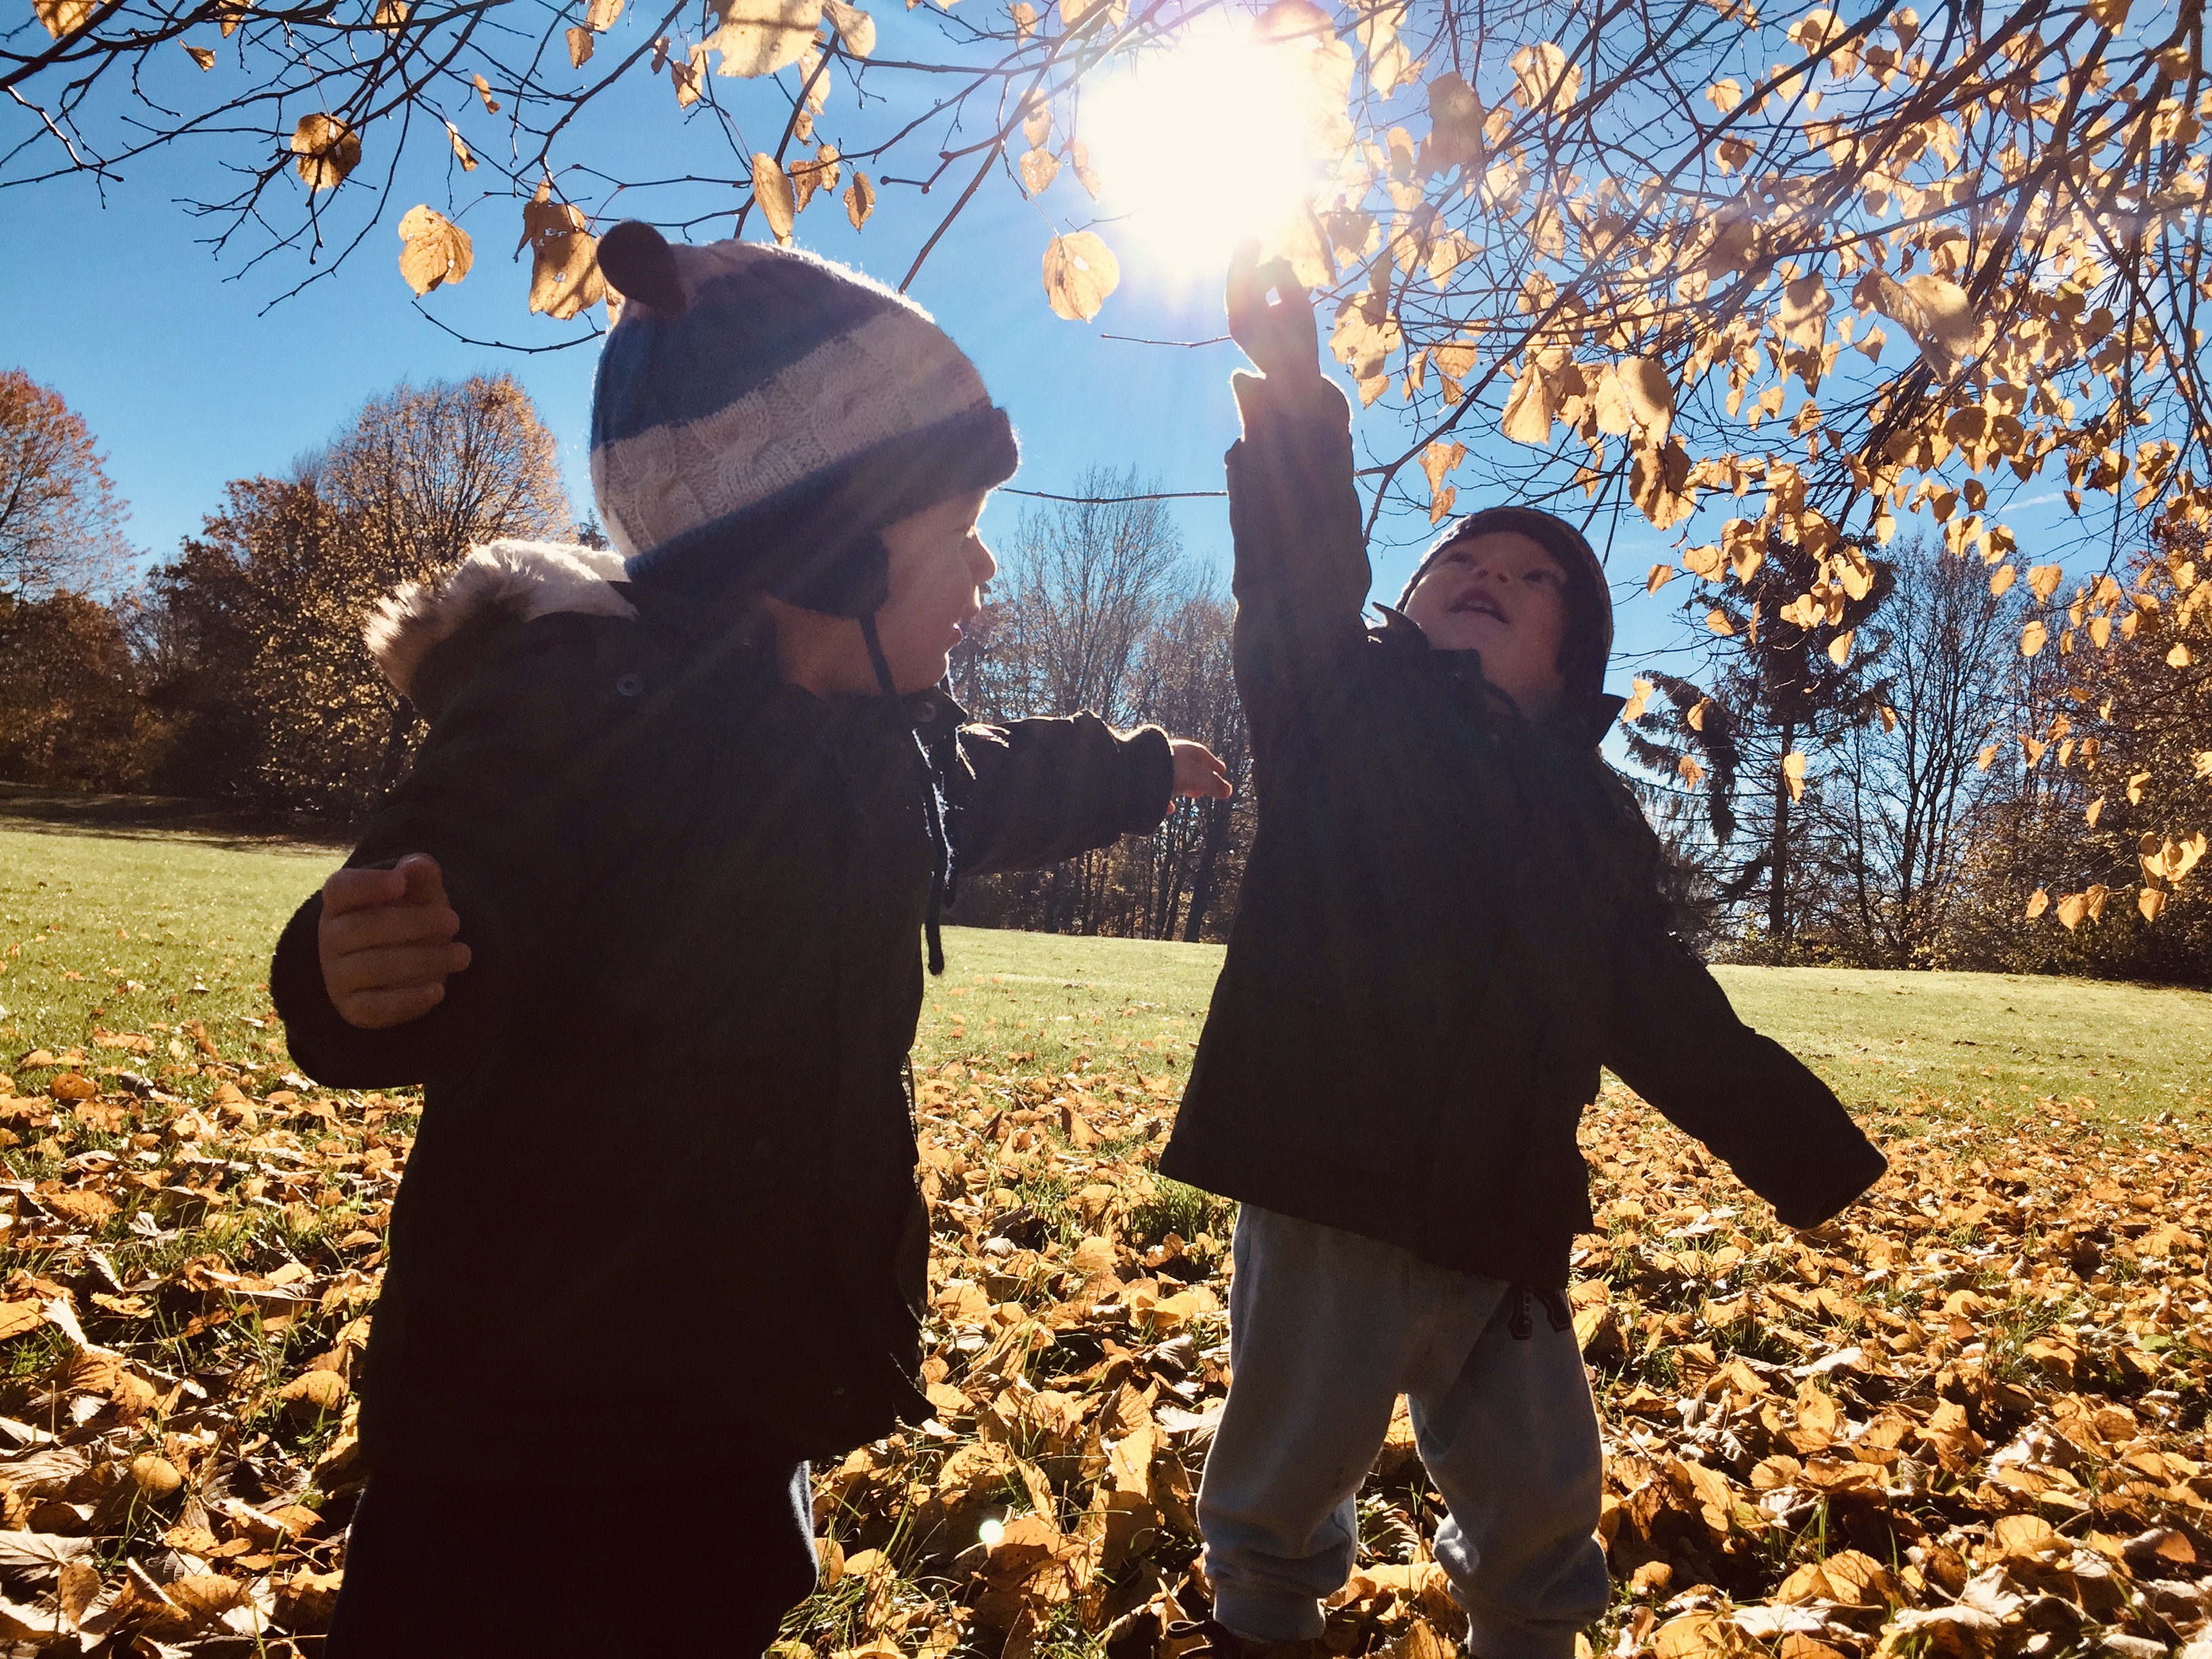 kids in nature touching the Sun